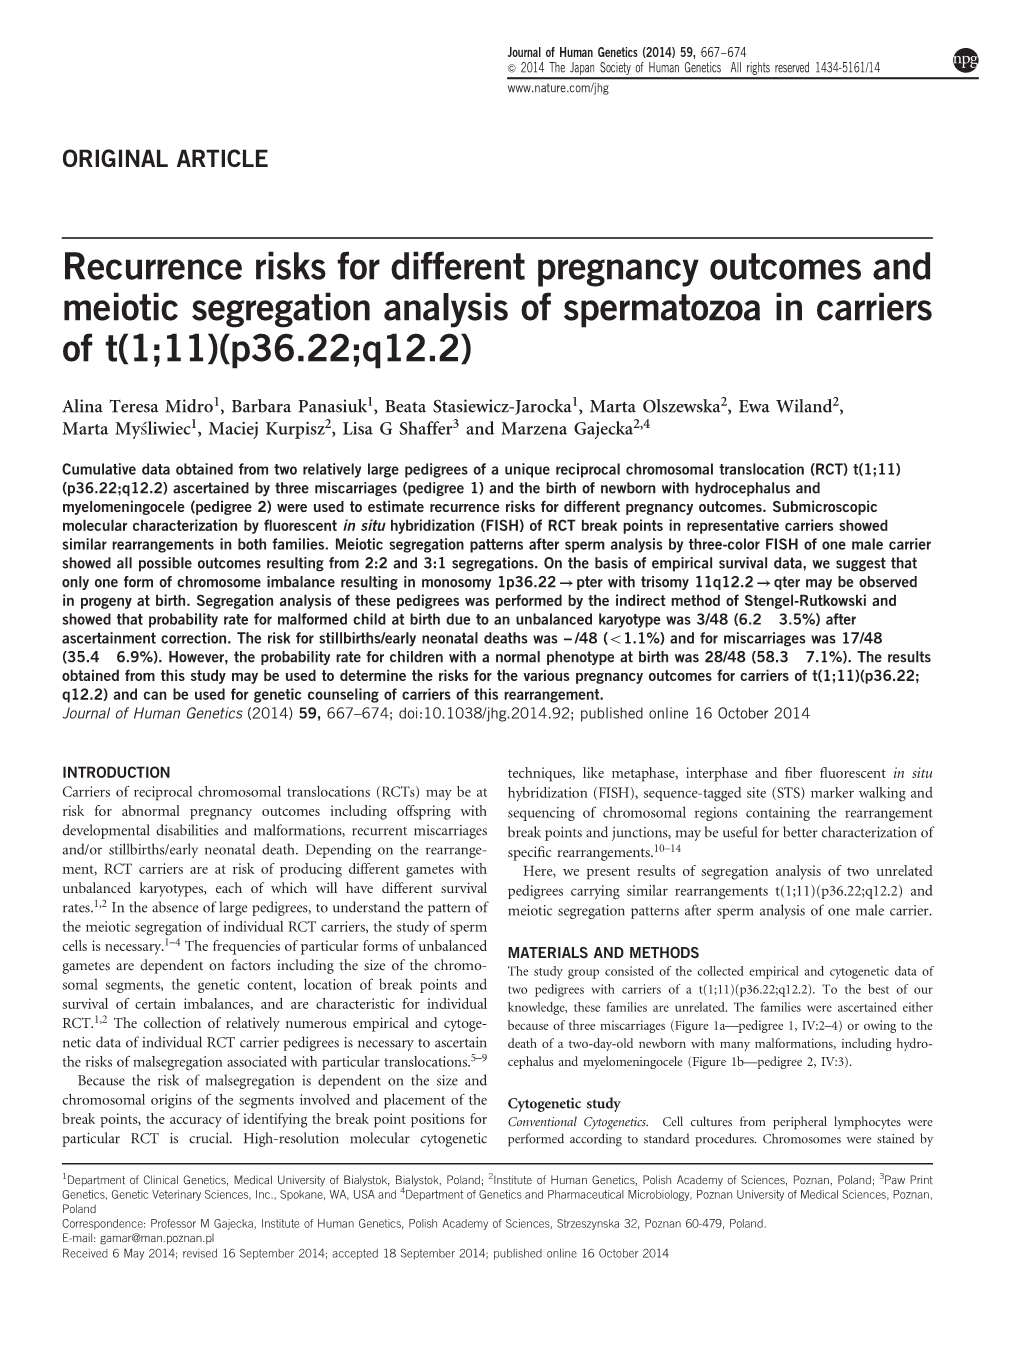 Recurrence Risks for Different Pregnancy Outcomes and Meiotic Segregation Analysis of Spermatozoa in Carriers of T(1;11)(P36.22;Q12.2)